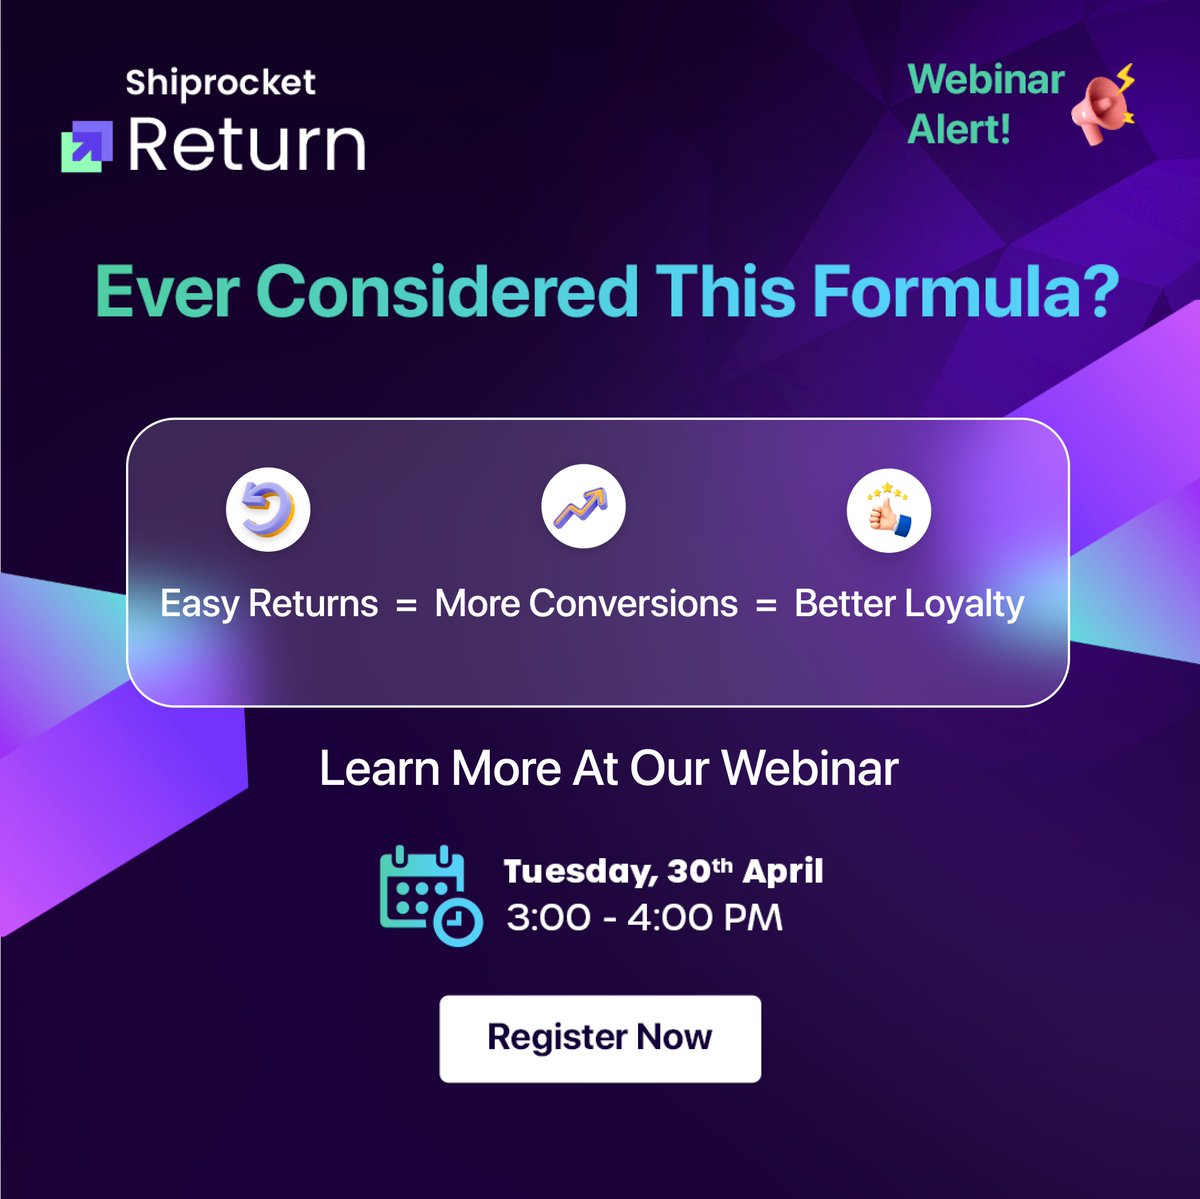 Unlock the winning formula for streamlining your returns process and standing out from the competition! 🌟 Save your spot for our upcoming webinar to learn more: lnkd.in/gjxskdnG #successformula #increaseconversions #easyreturns #shipping #ecommerce #ecommerceformula